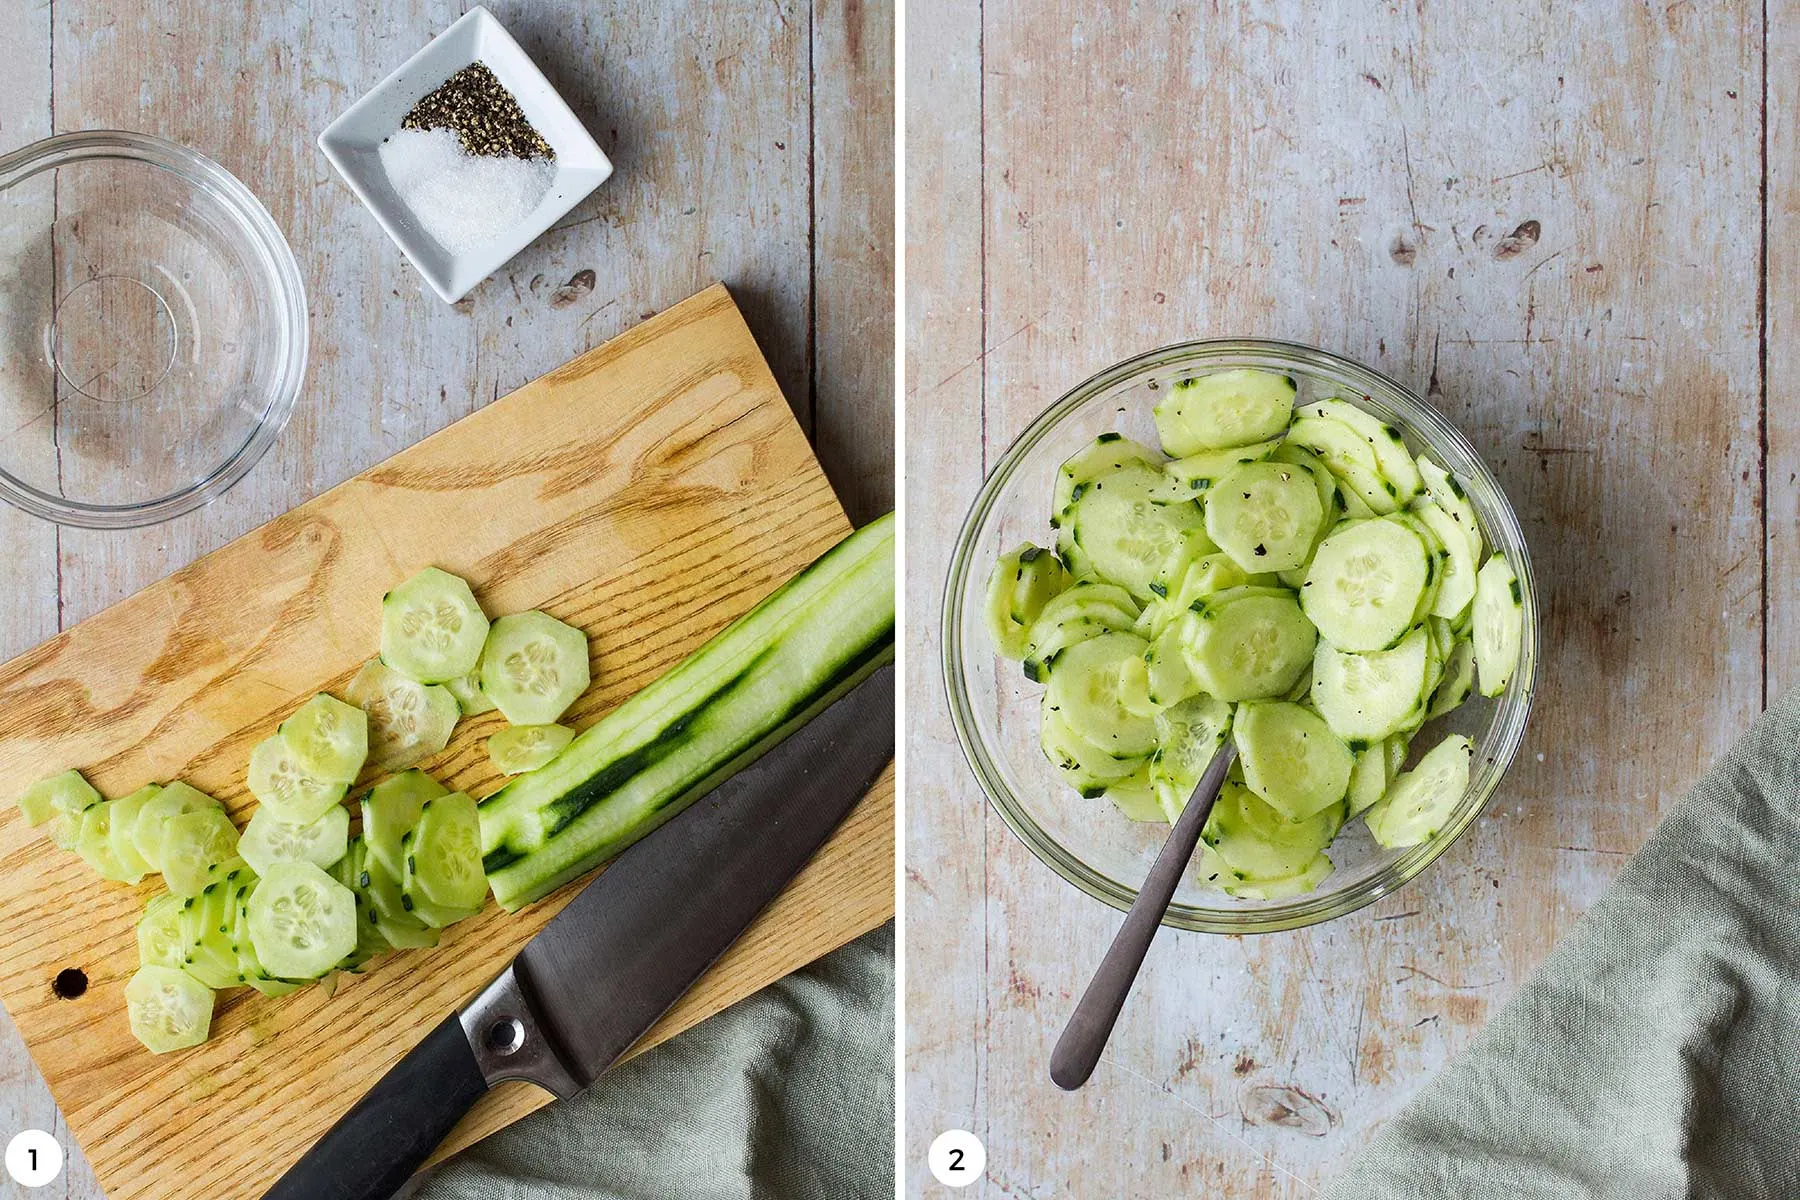 How to make cucumber salad.